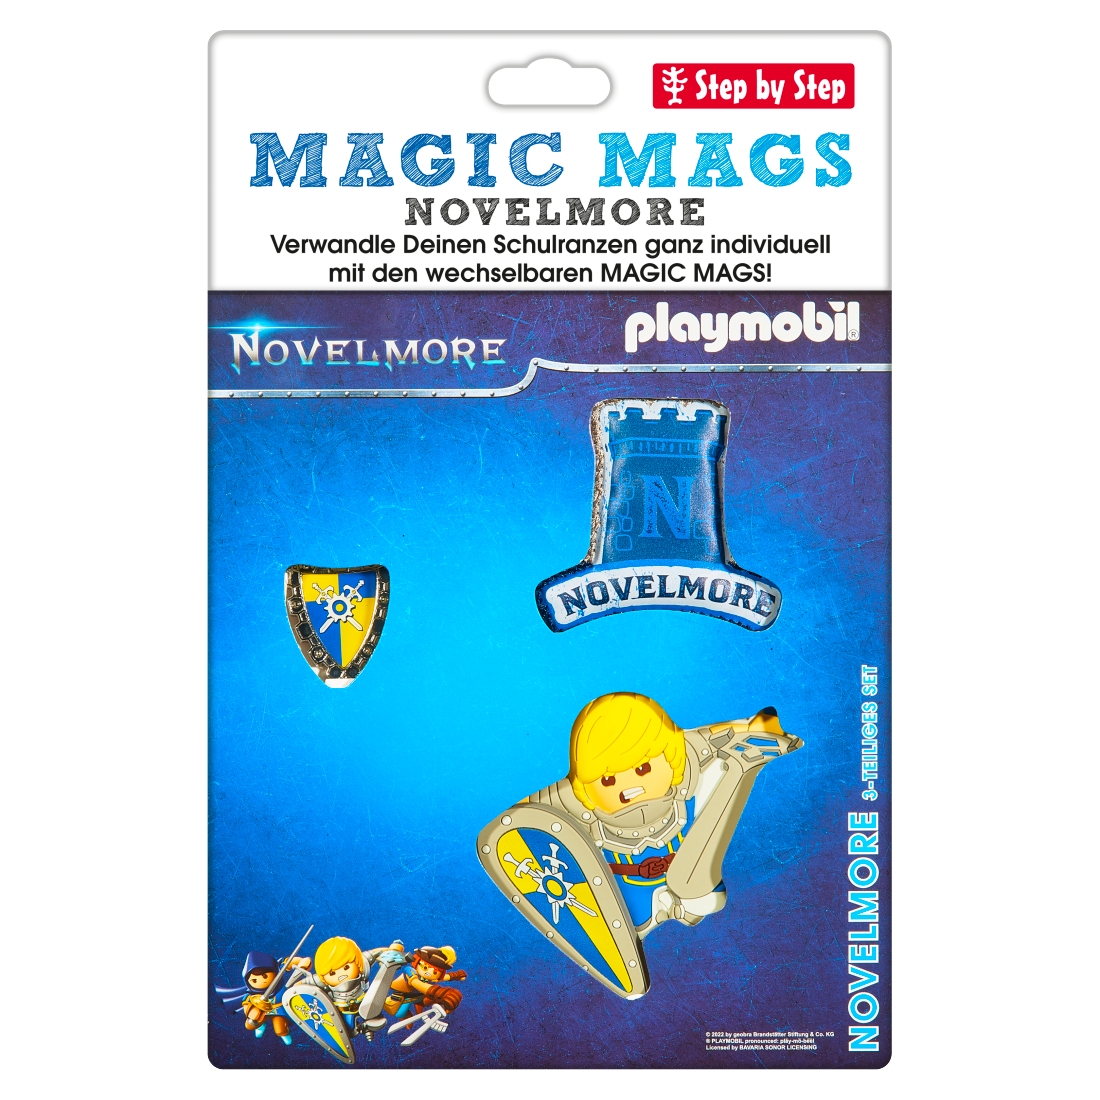 Step by Step MAGIC MAGS Playmobil Novelmore"